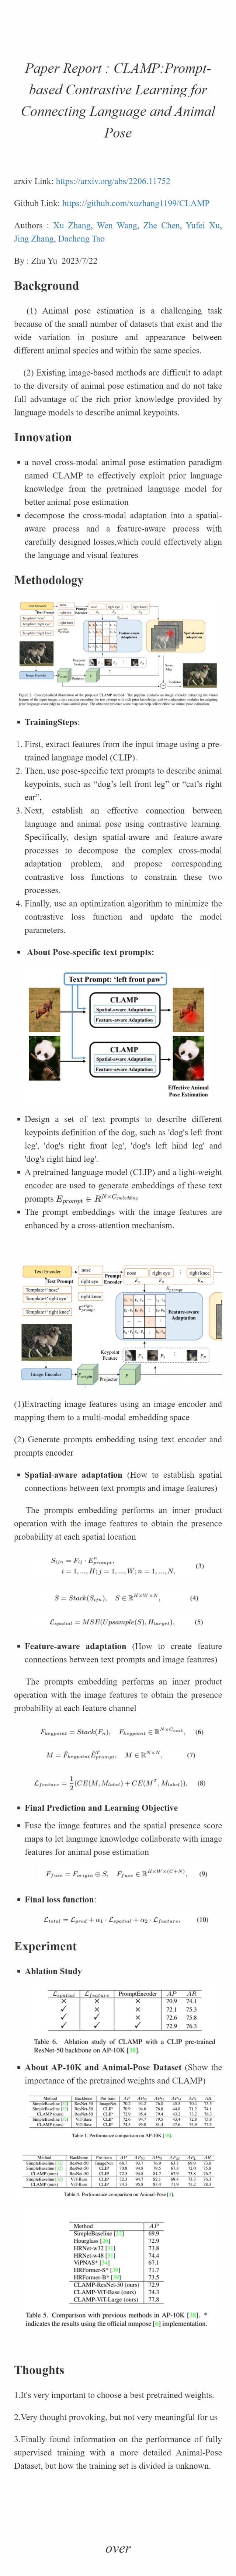 CLAMPPrompt-based Contrastive Learning for Connecting Language andAnimal Pose